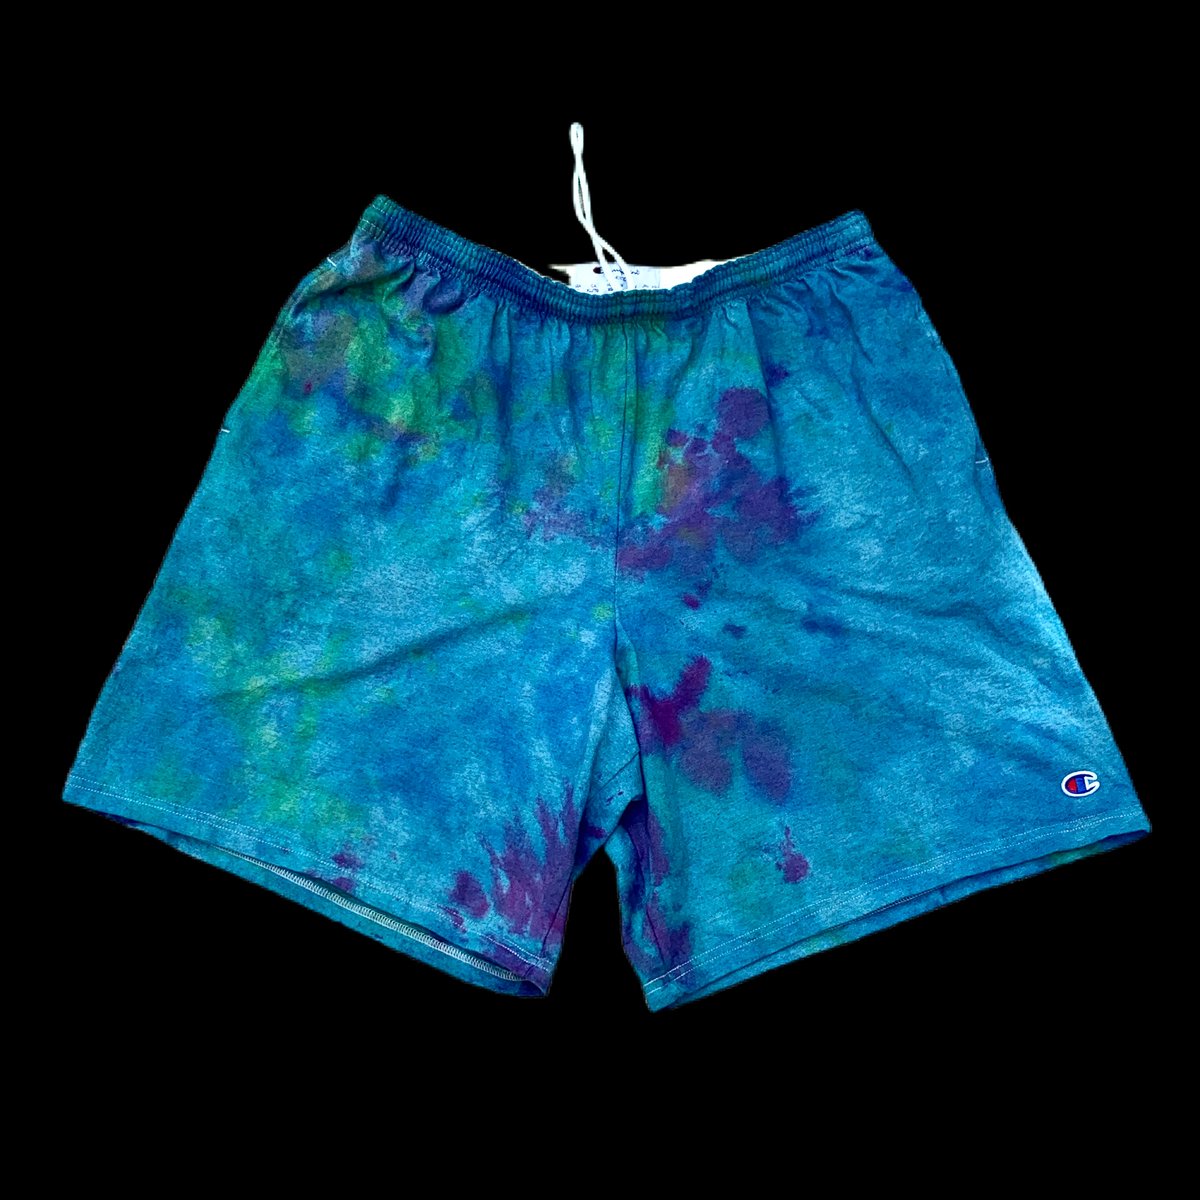 Custom Hand Dyed Champion Shorts! With Pockets!